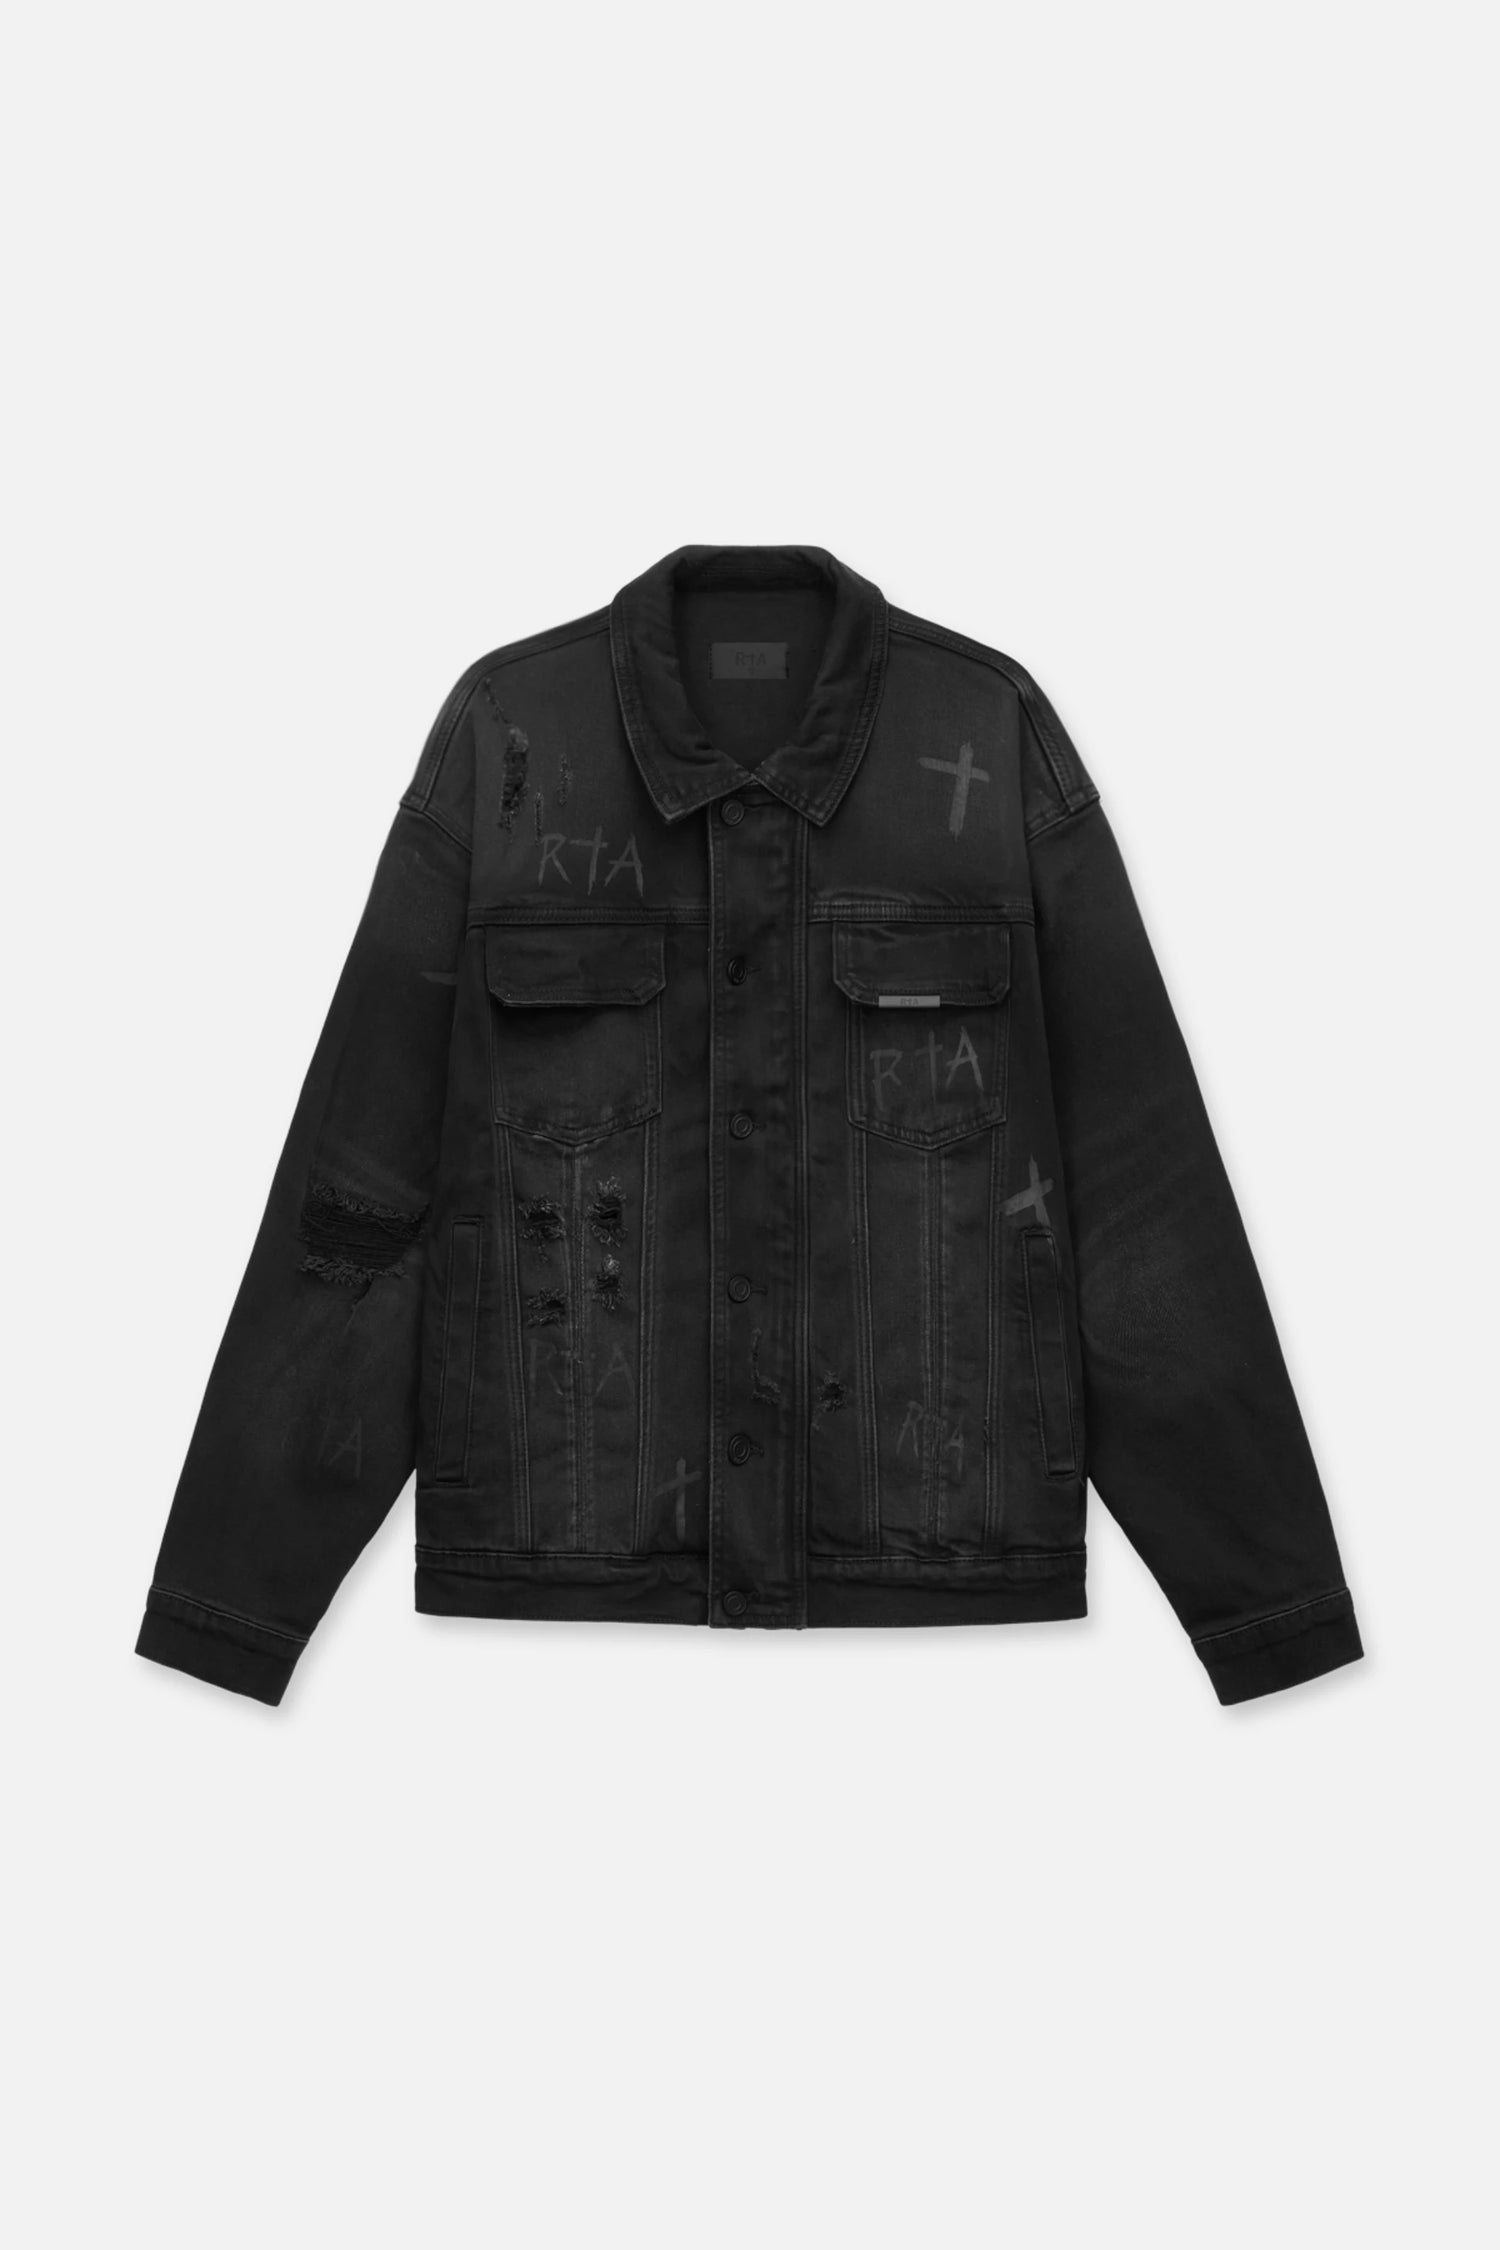 DANNY JEAN JACKET | CHARCOAL DISTRESSED